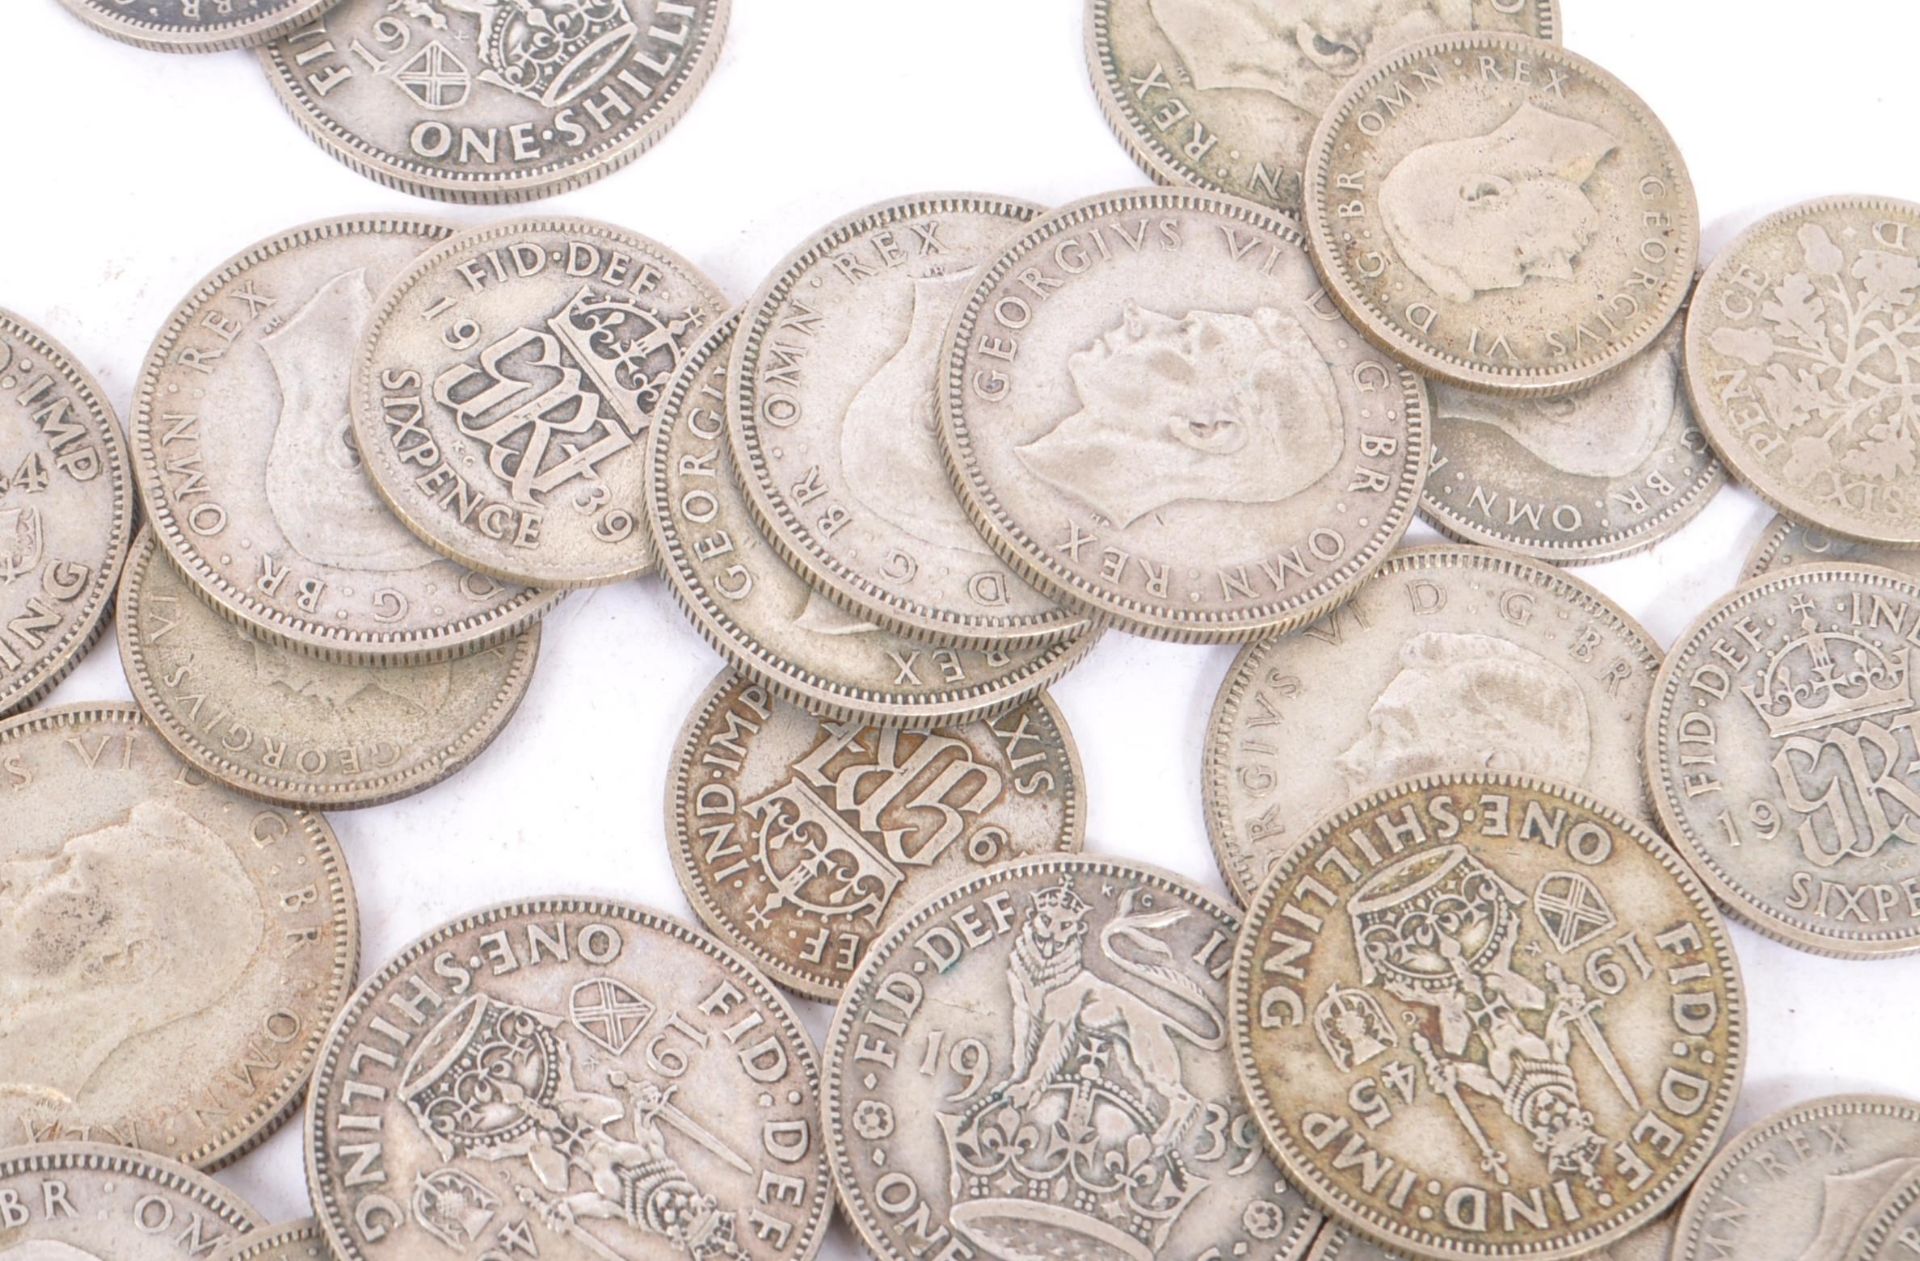 COLLECTION PRE 1946 BRITISH SIXPENCE & SHILLING COINS - Image 6 of 8